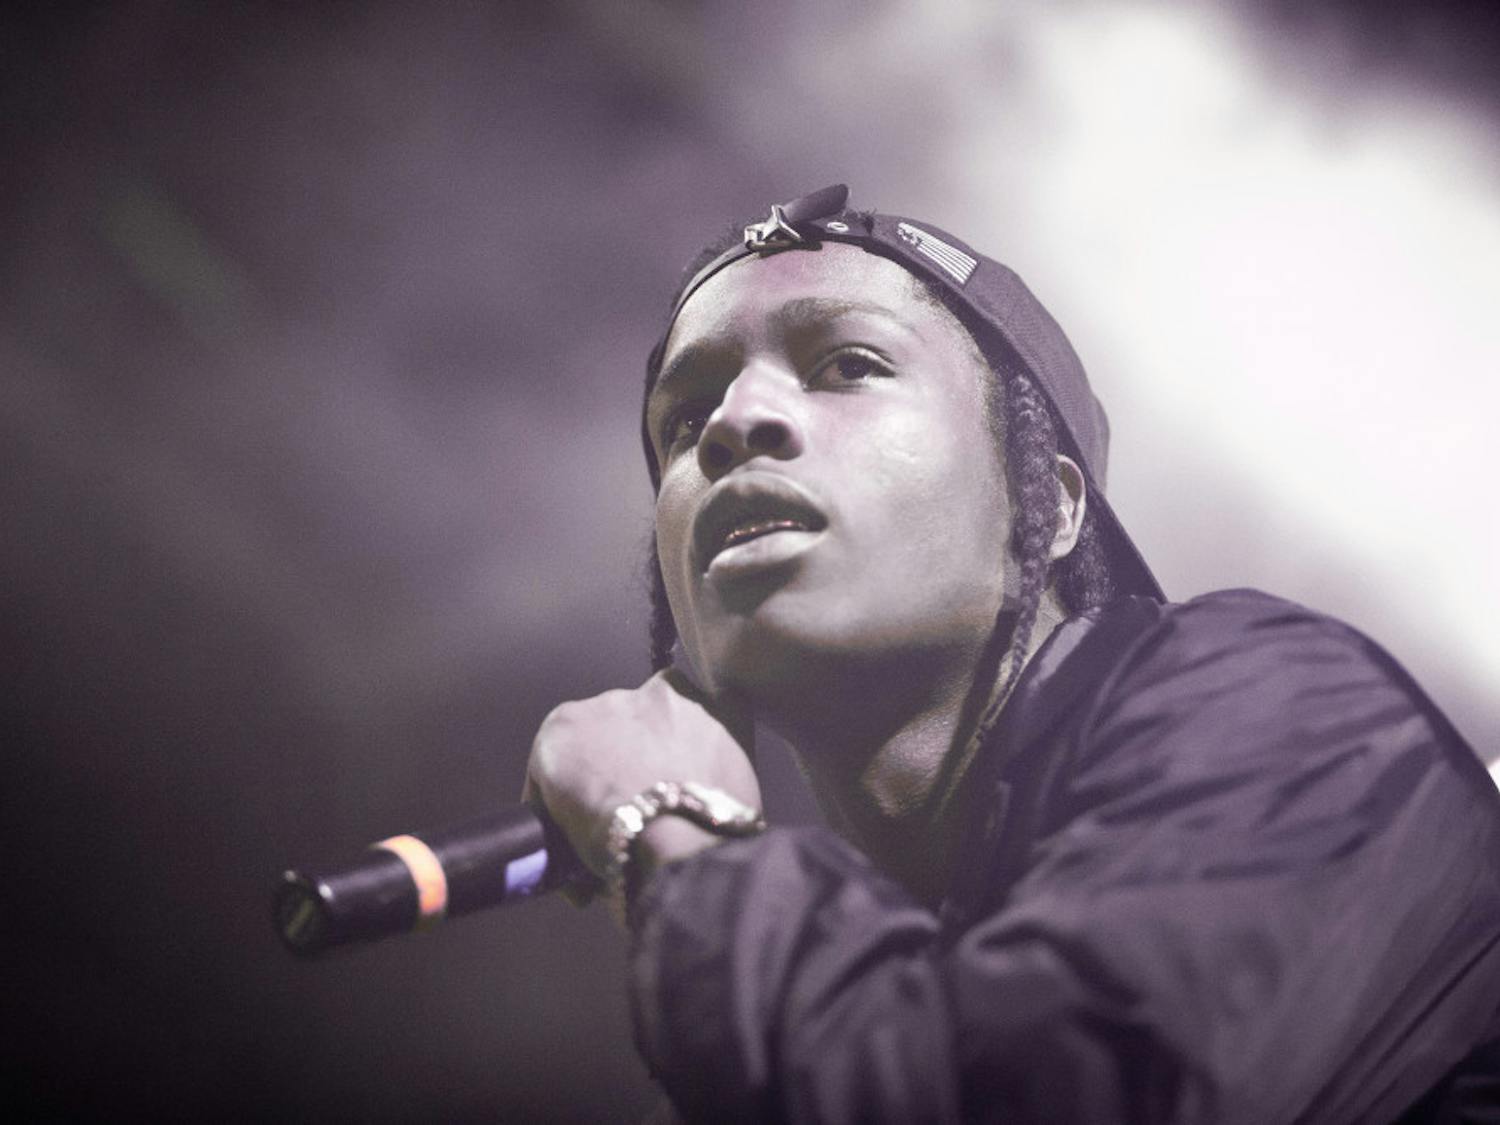 "A$AP Rocky" by Linda Flores, used under CC BY-NC-ND 2.0